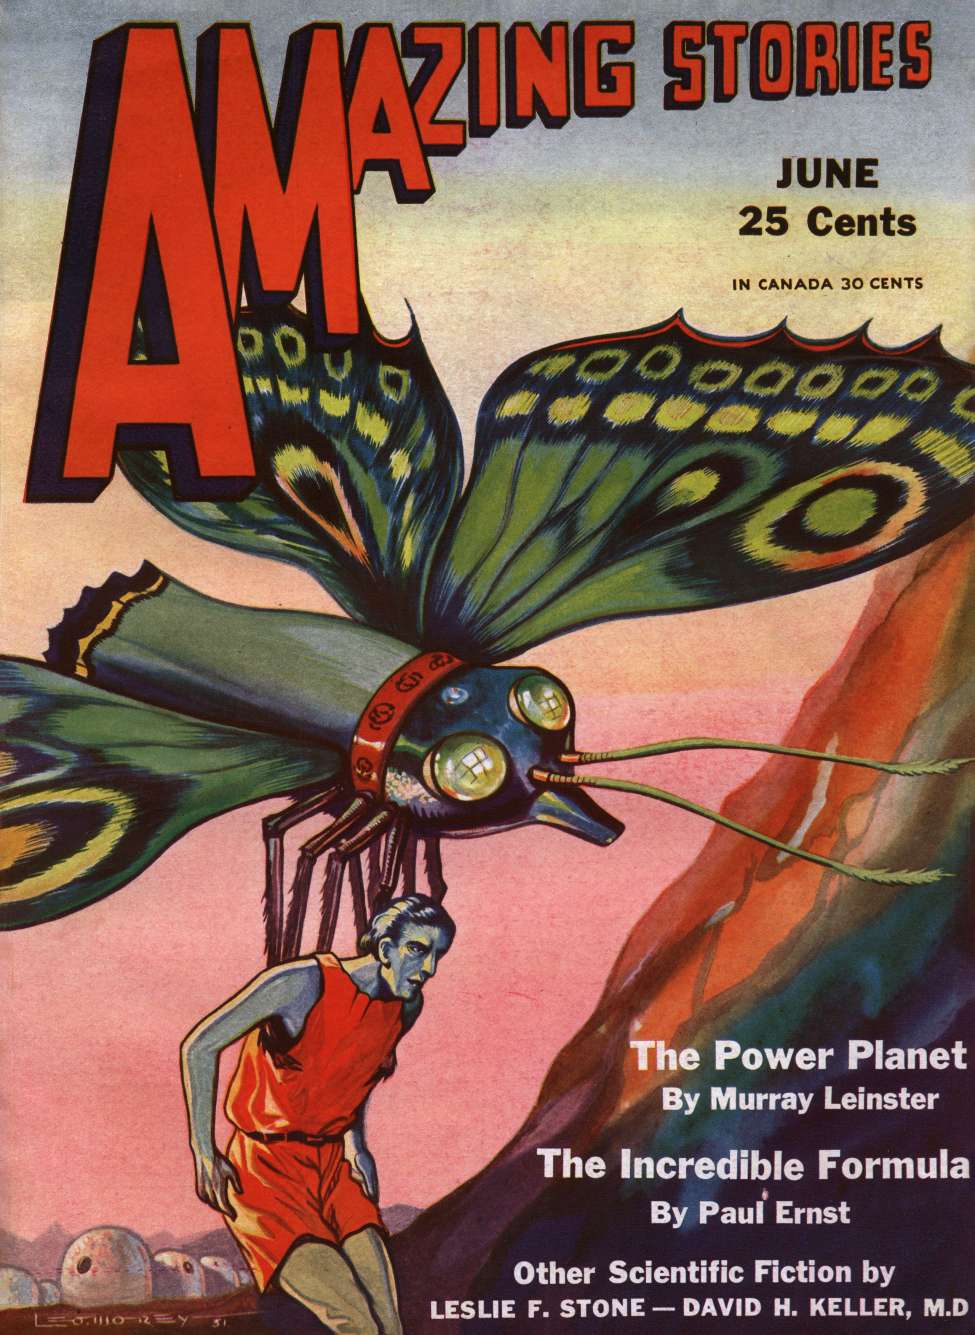 Book Cover For Amazing Stories v6 3 - The Power Planet - Murray Leinster